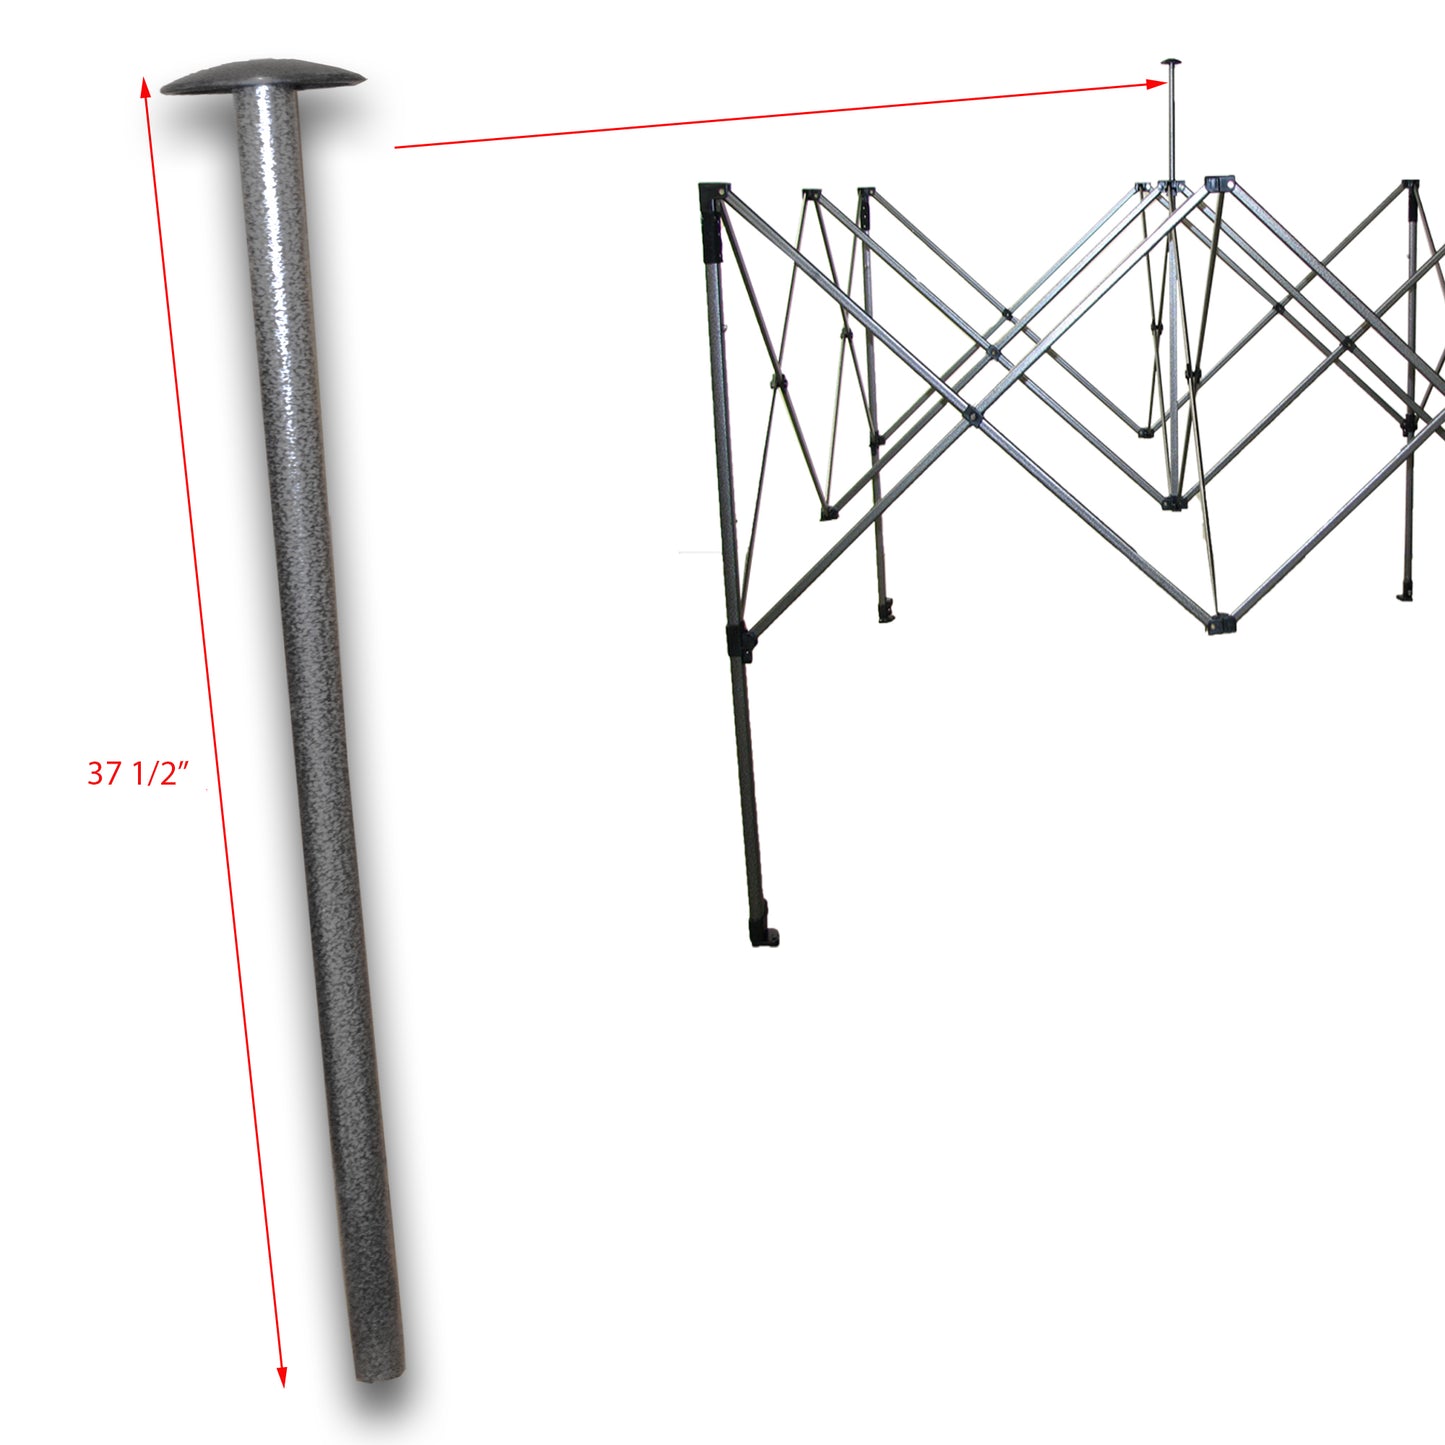 for ABCCANOPY S1 Commercial Deluxe, S2 Premium 10x10, 10x15, 10x20 Pop Up Canopy Gazebo Shelter Upper Peak Pole with Upper Cap Replacement Parts (Part M and Part A)